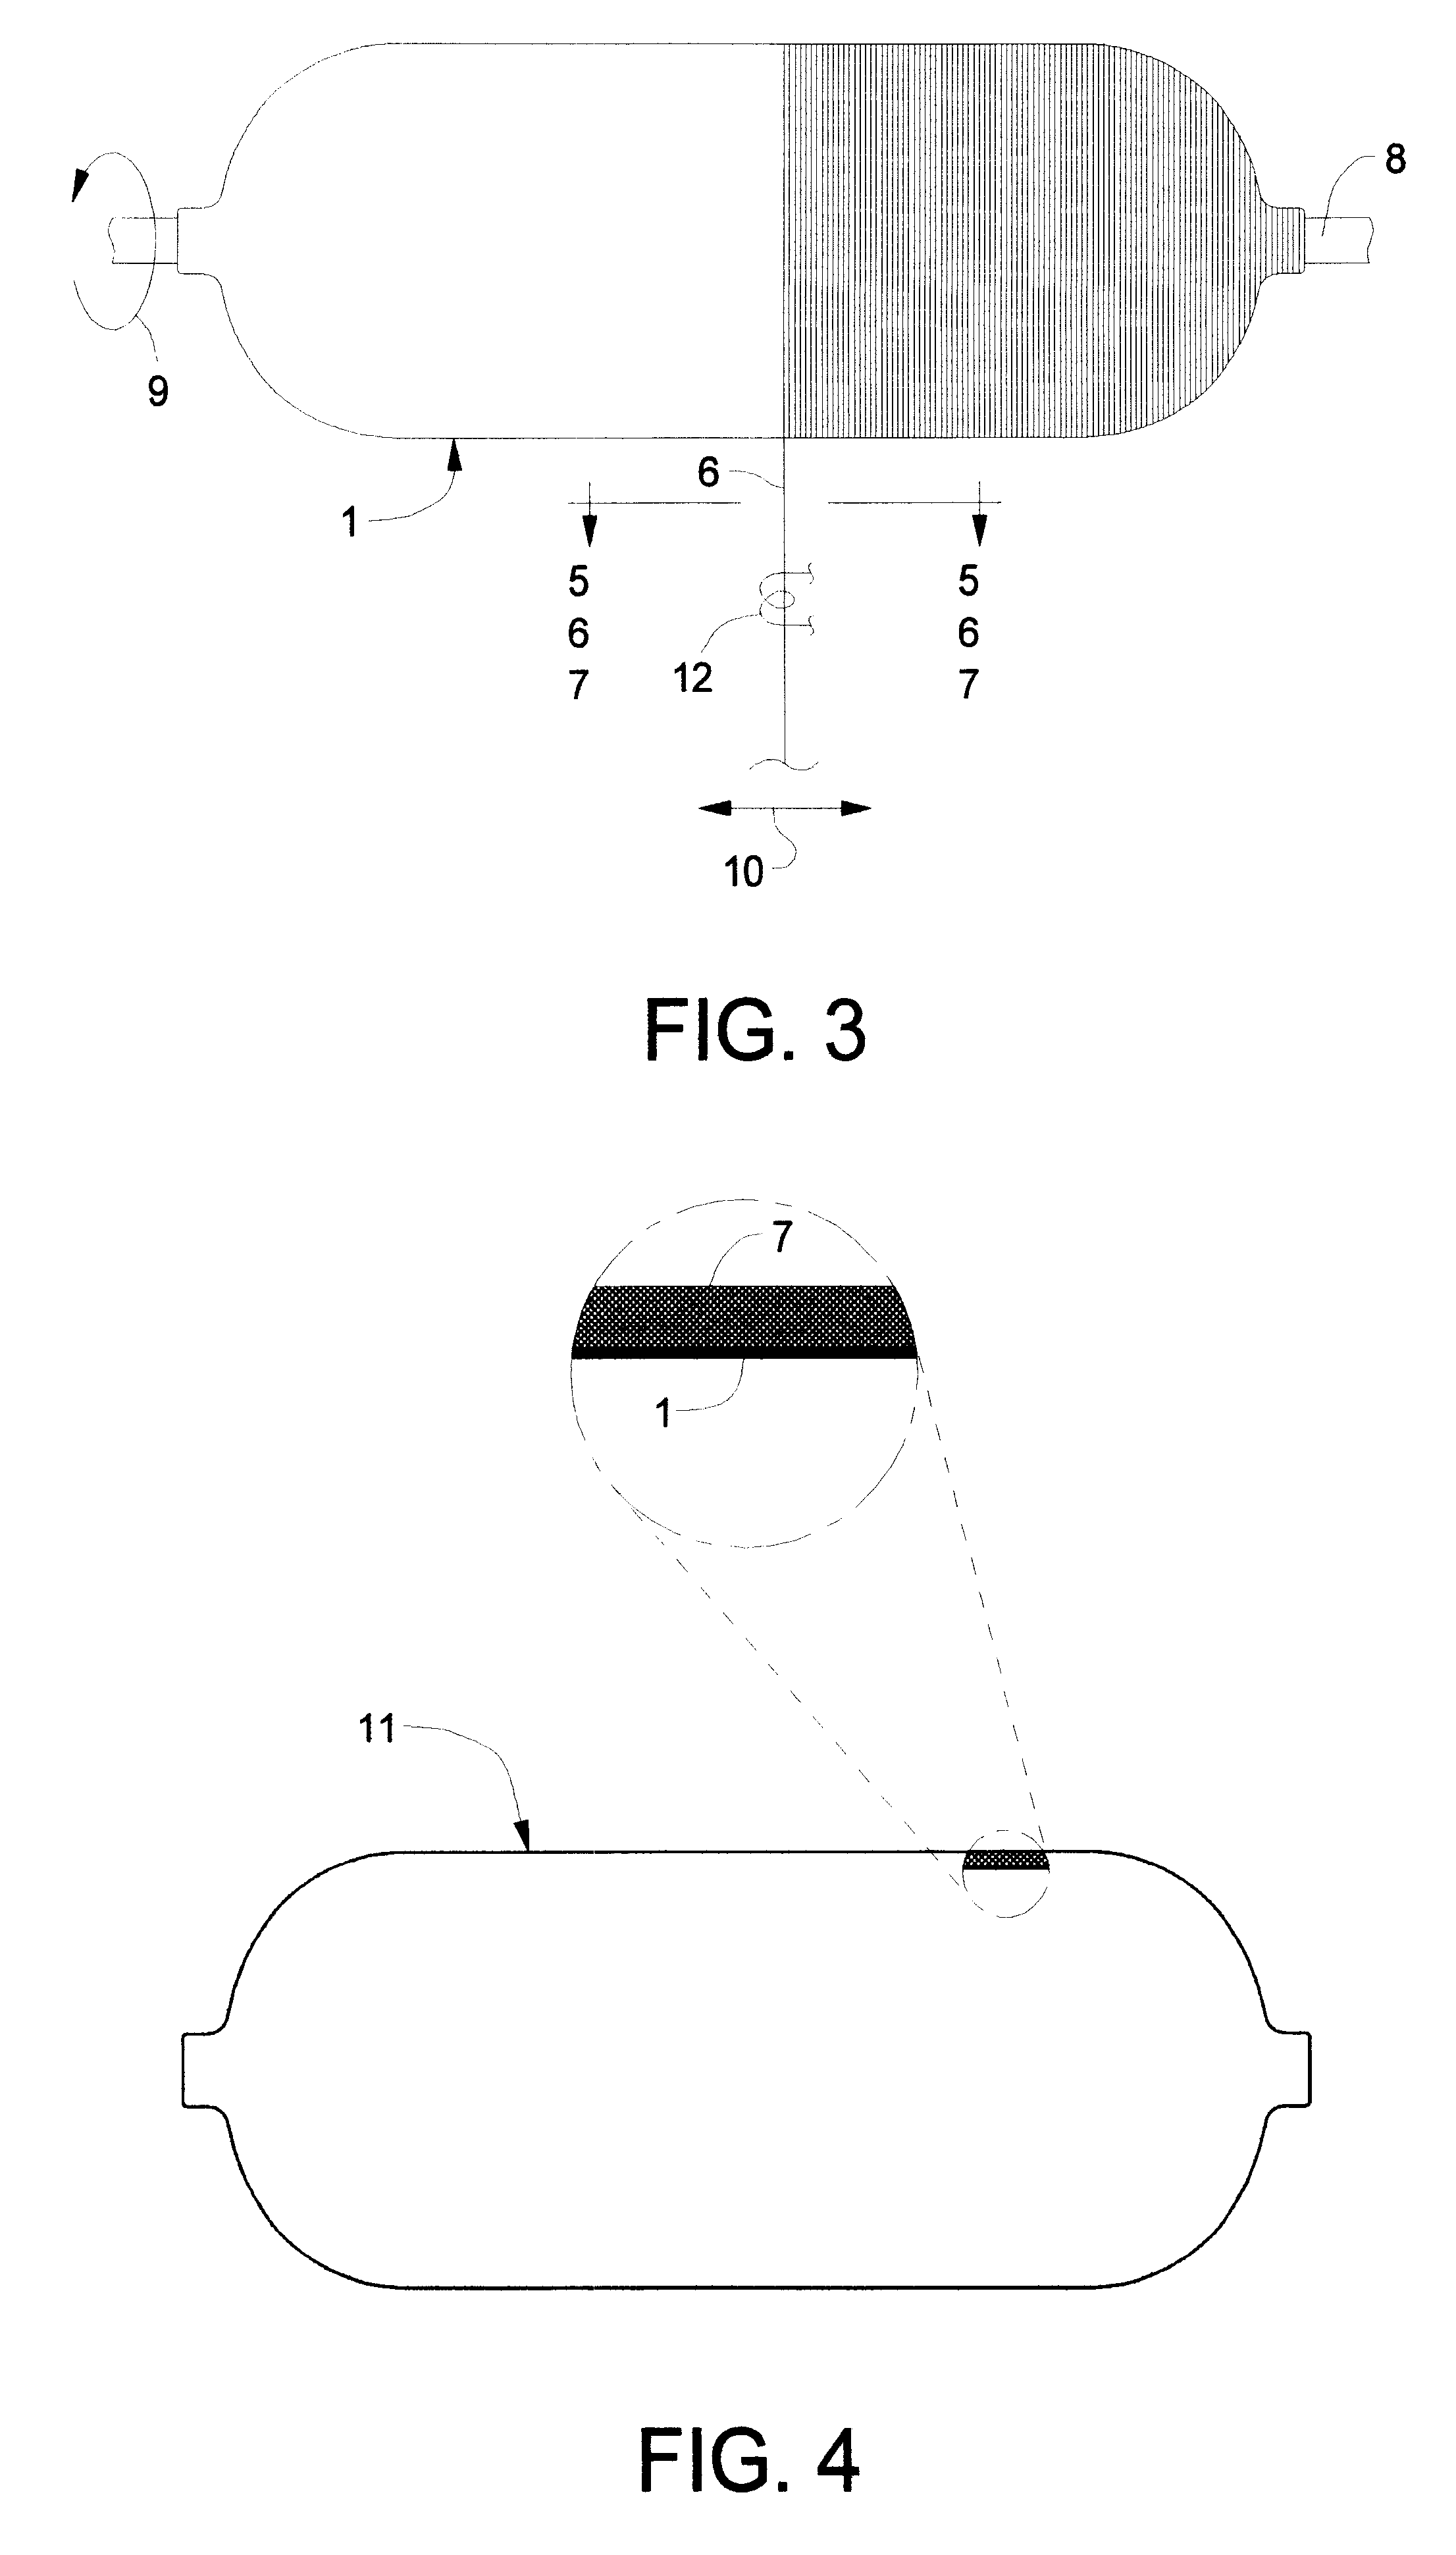 Method for fabricating composite pressure vessels and products fabricated by the method